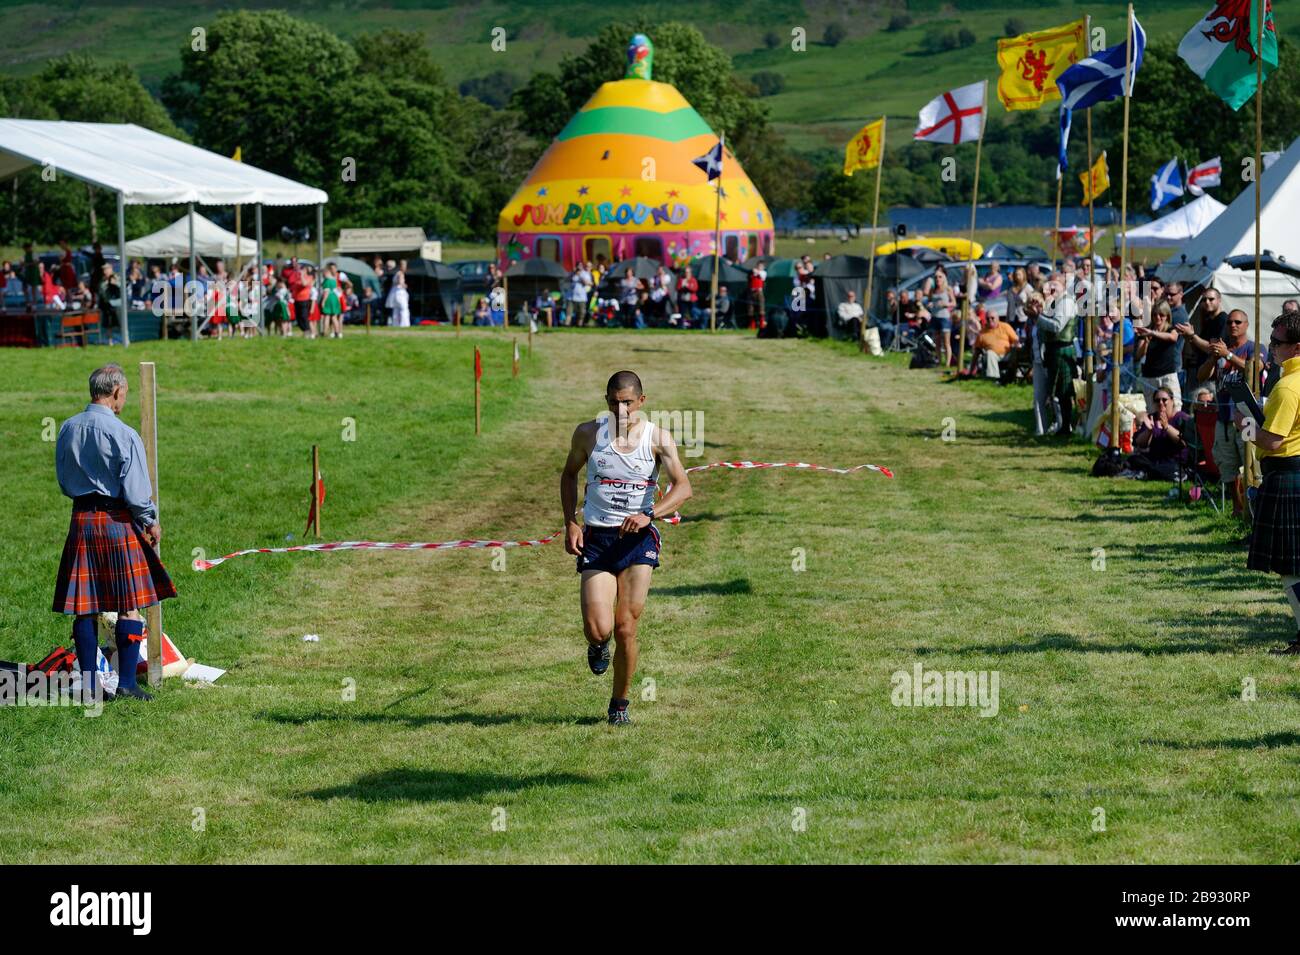 Runners at the Highland games of Lochearnhead, near Crieff, Scotland. Stock Photo